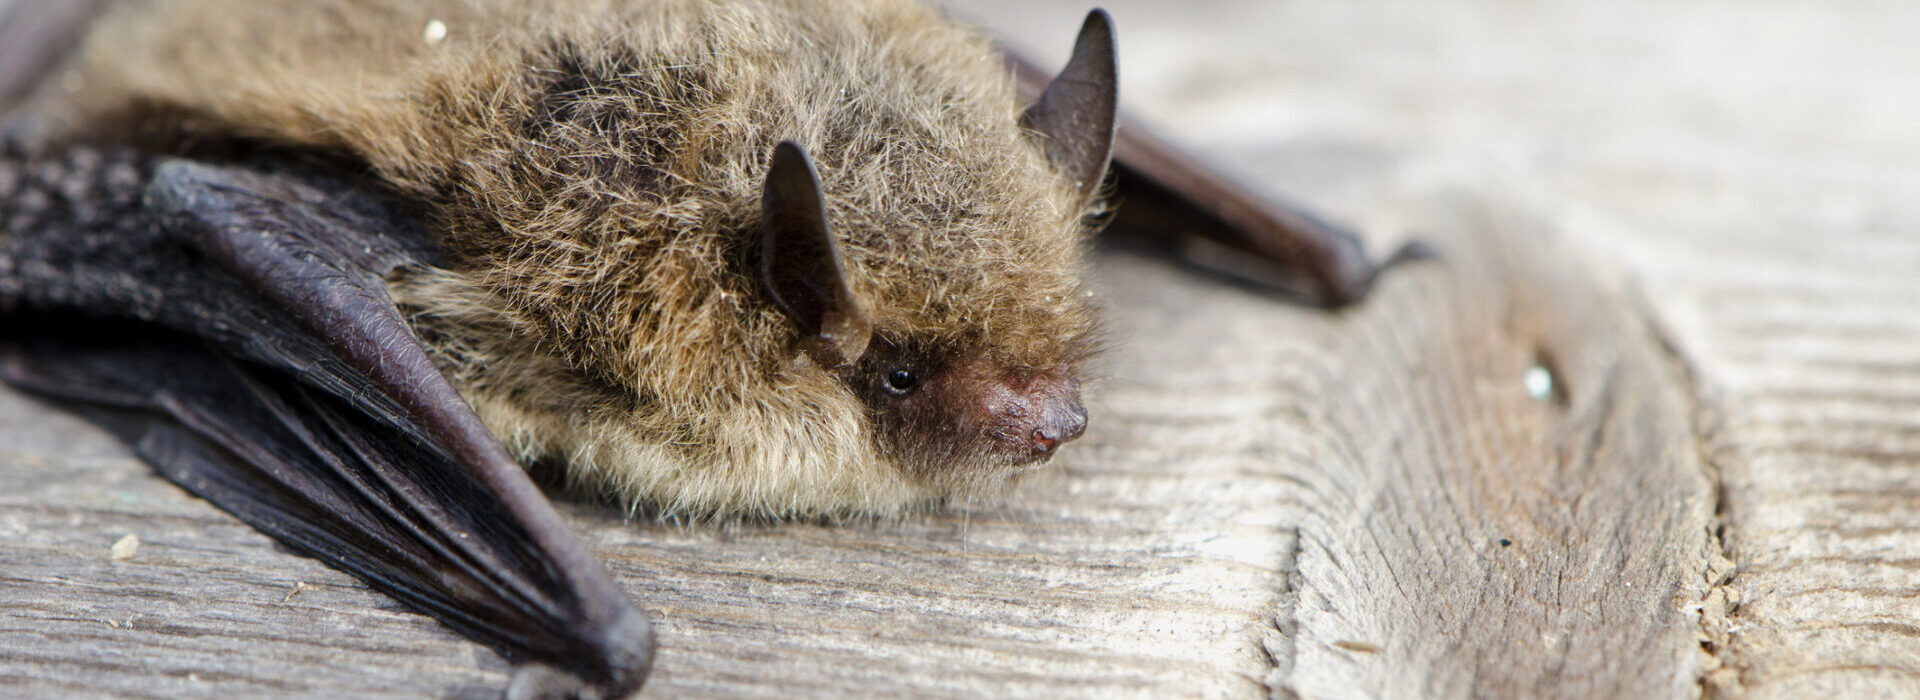 Rare Bat Species Discovered in the Broads National Park